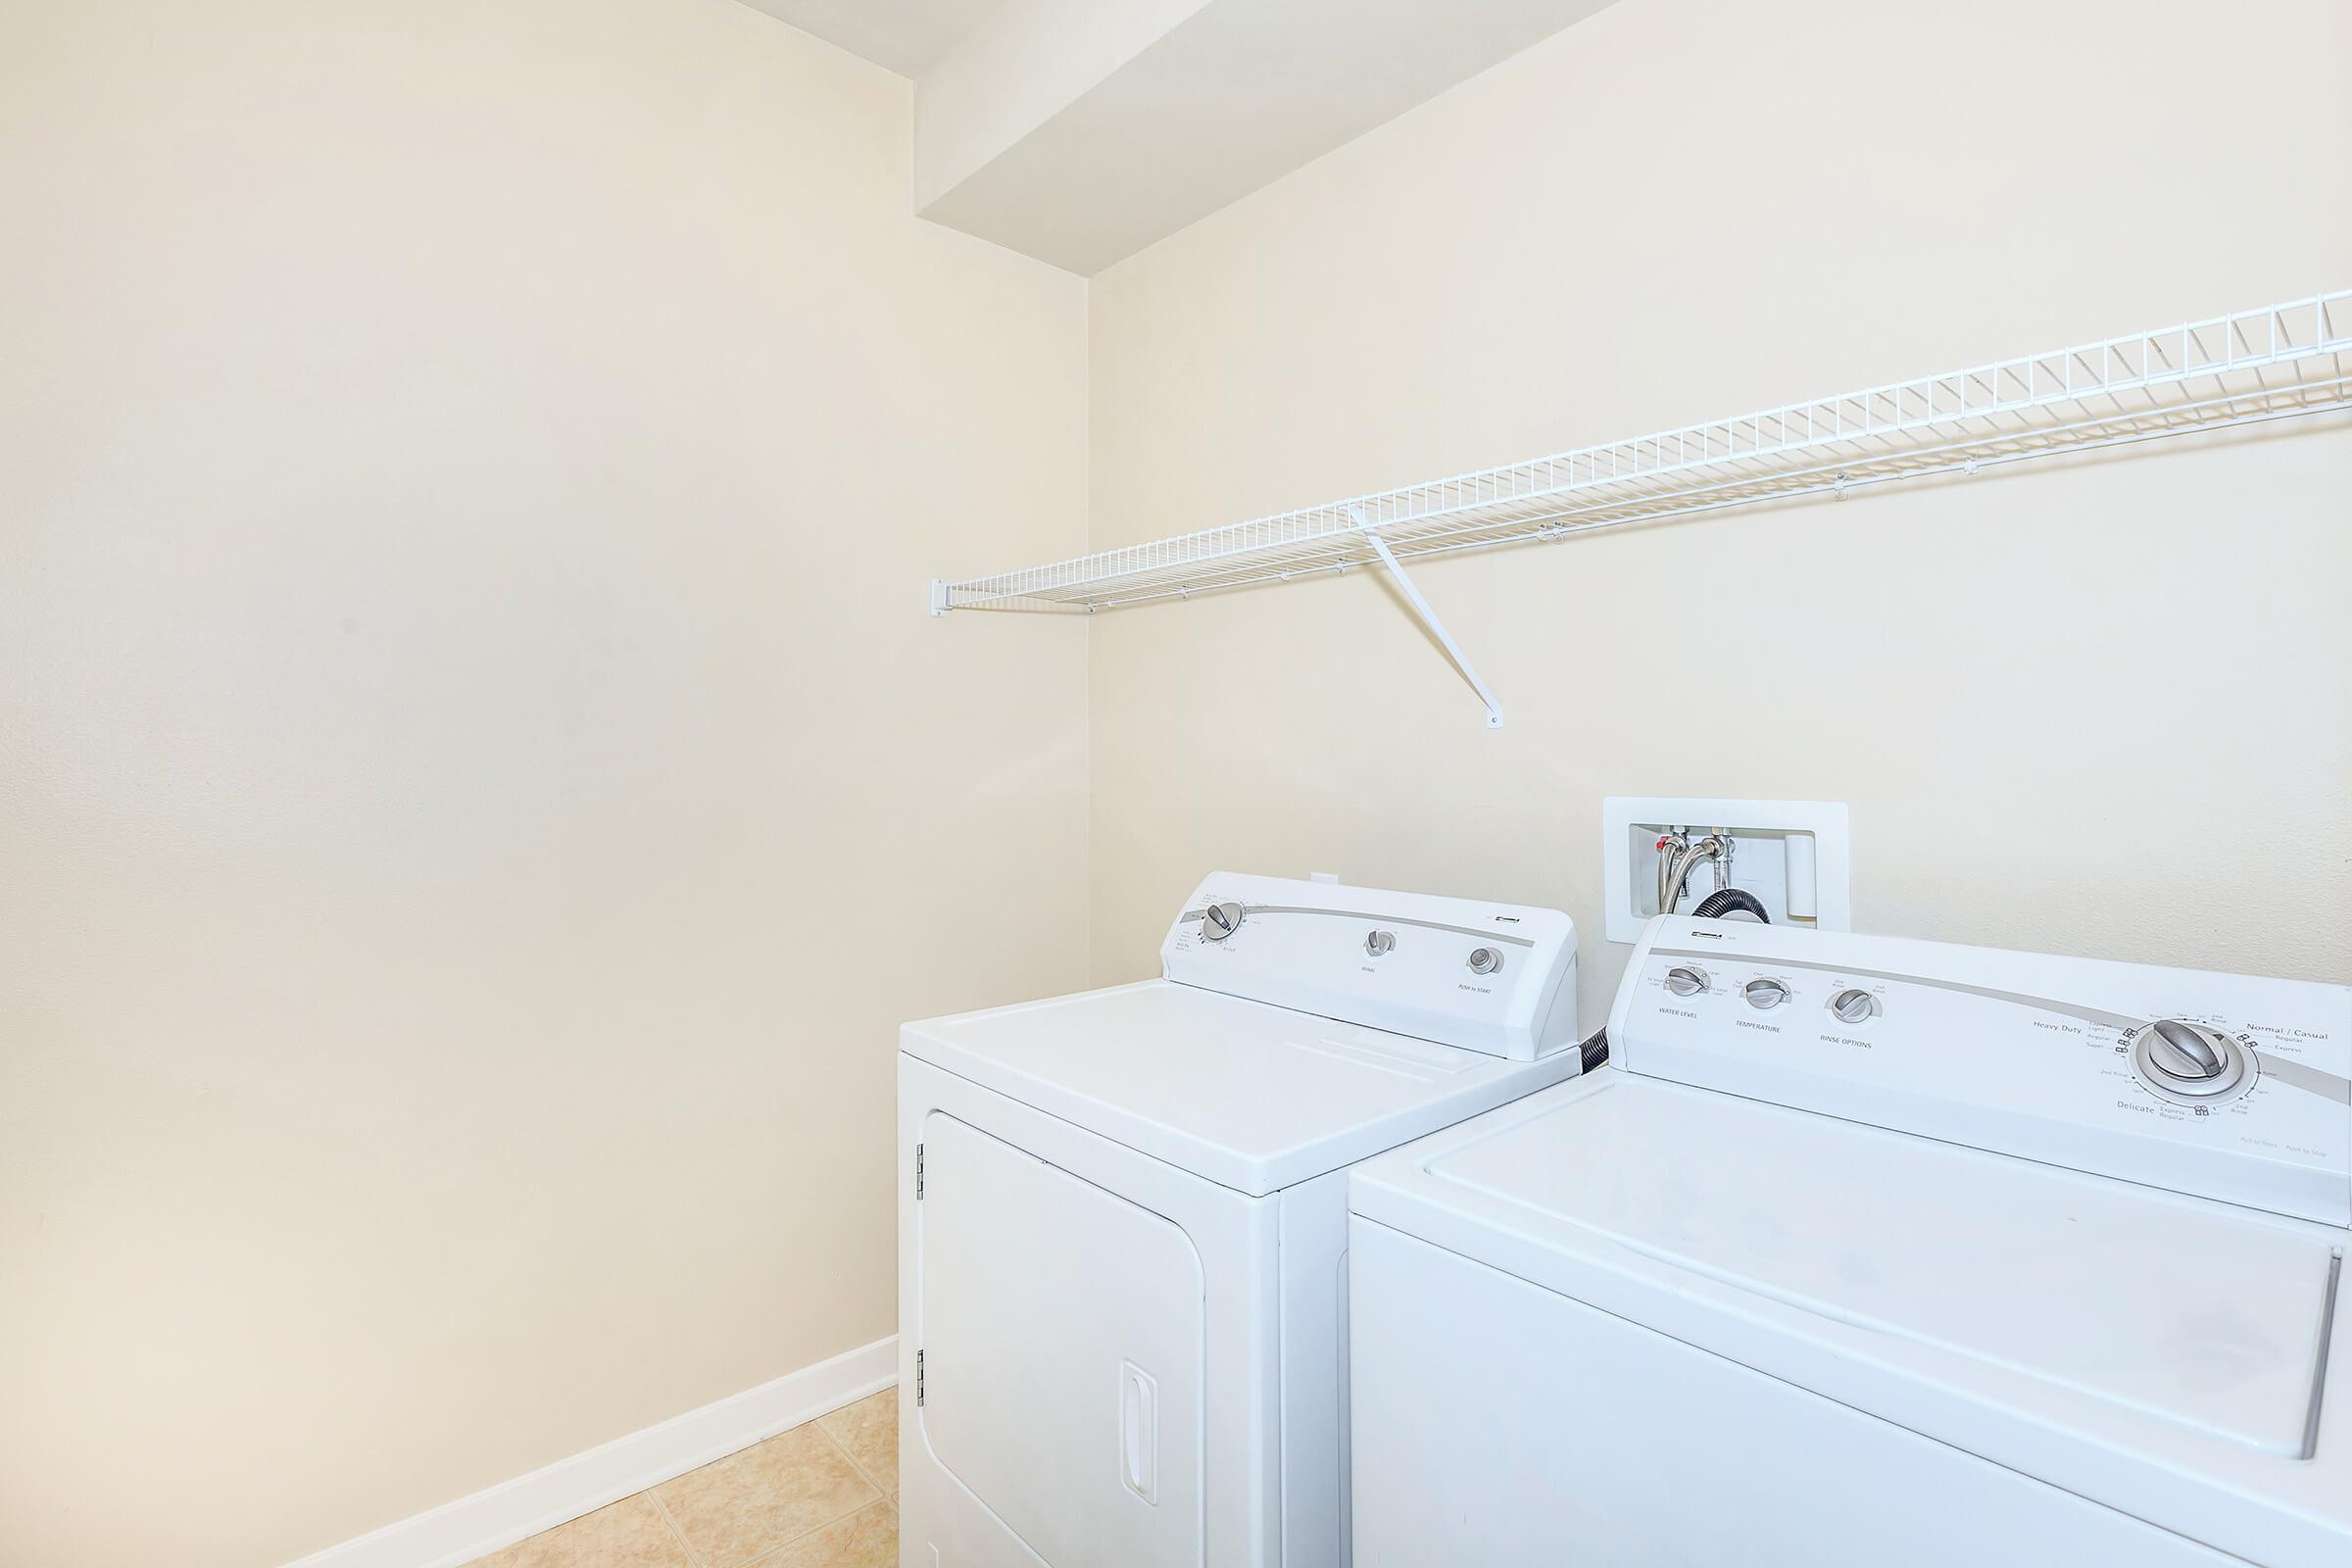 Unfurnished washer and dryer in the laundry closet